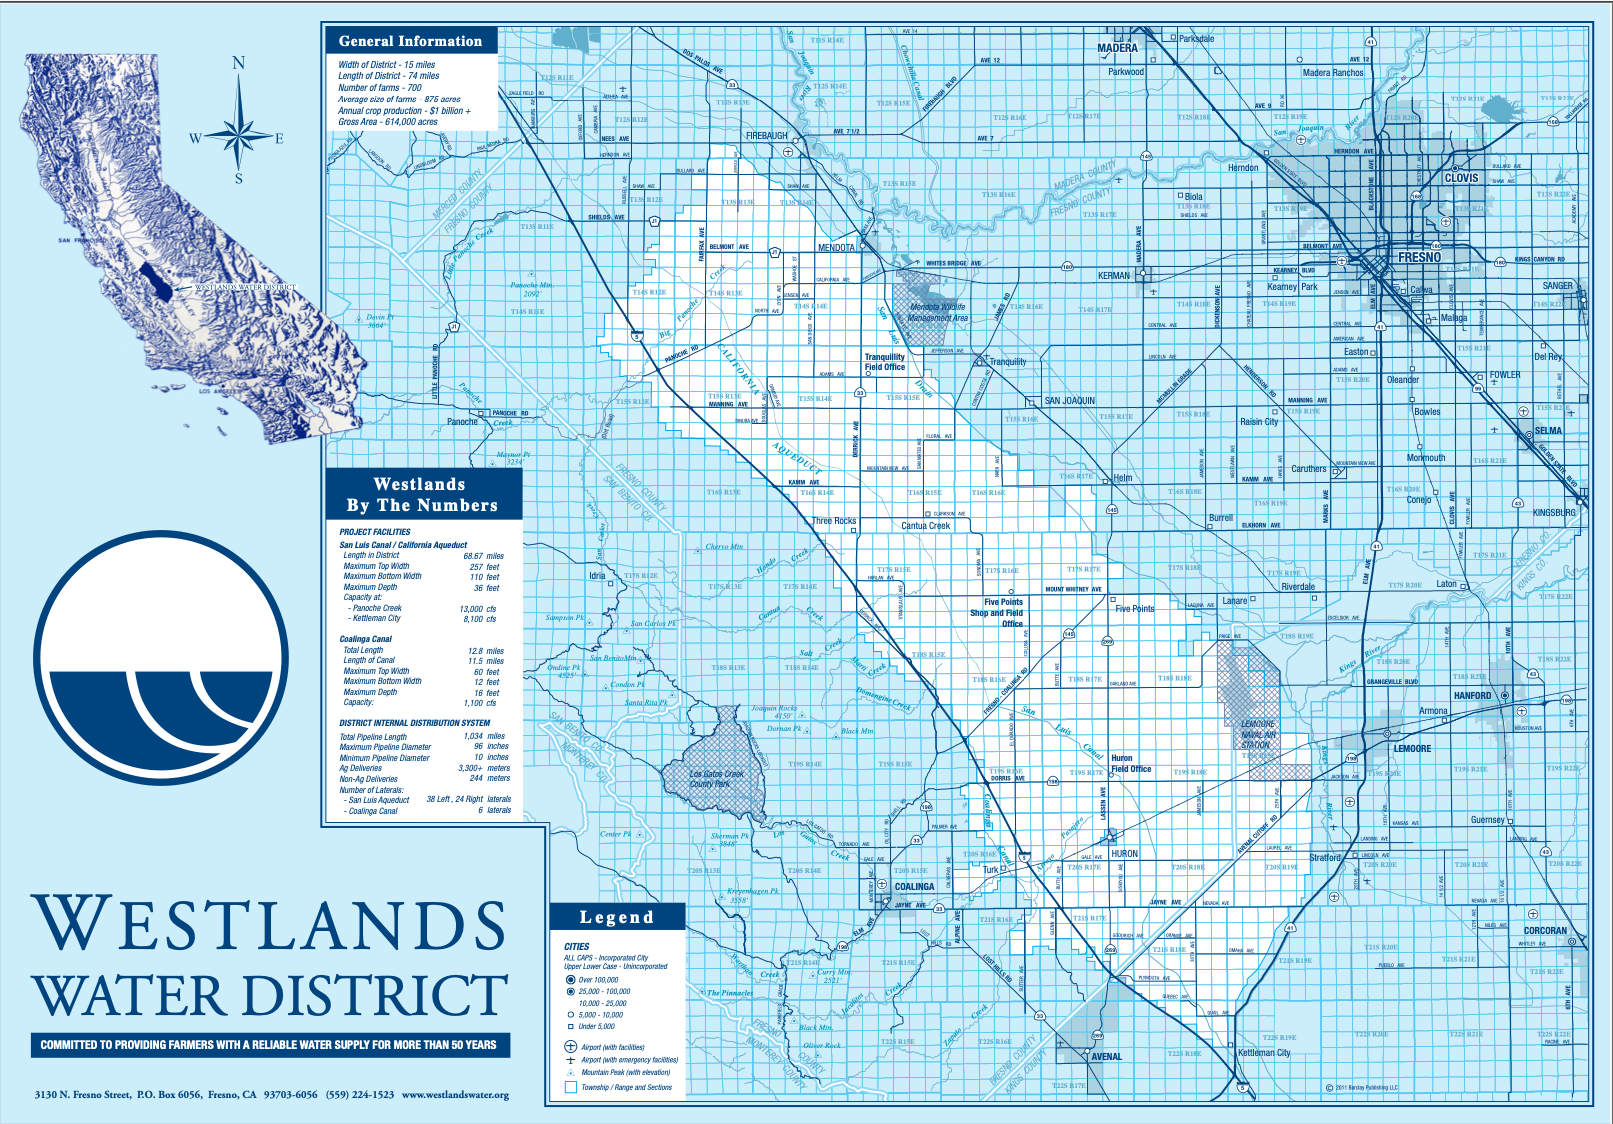  The Westlands Water District is 15 miles wide and 74 miles long. It distributes water to farmers and municipalities in Fresno and Kings County.  